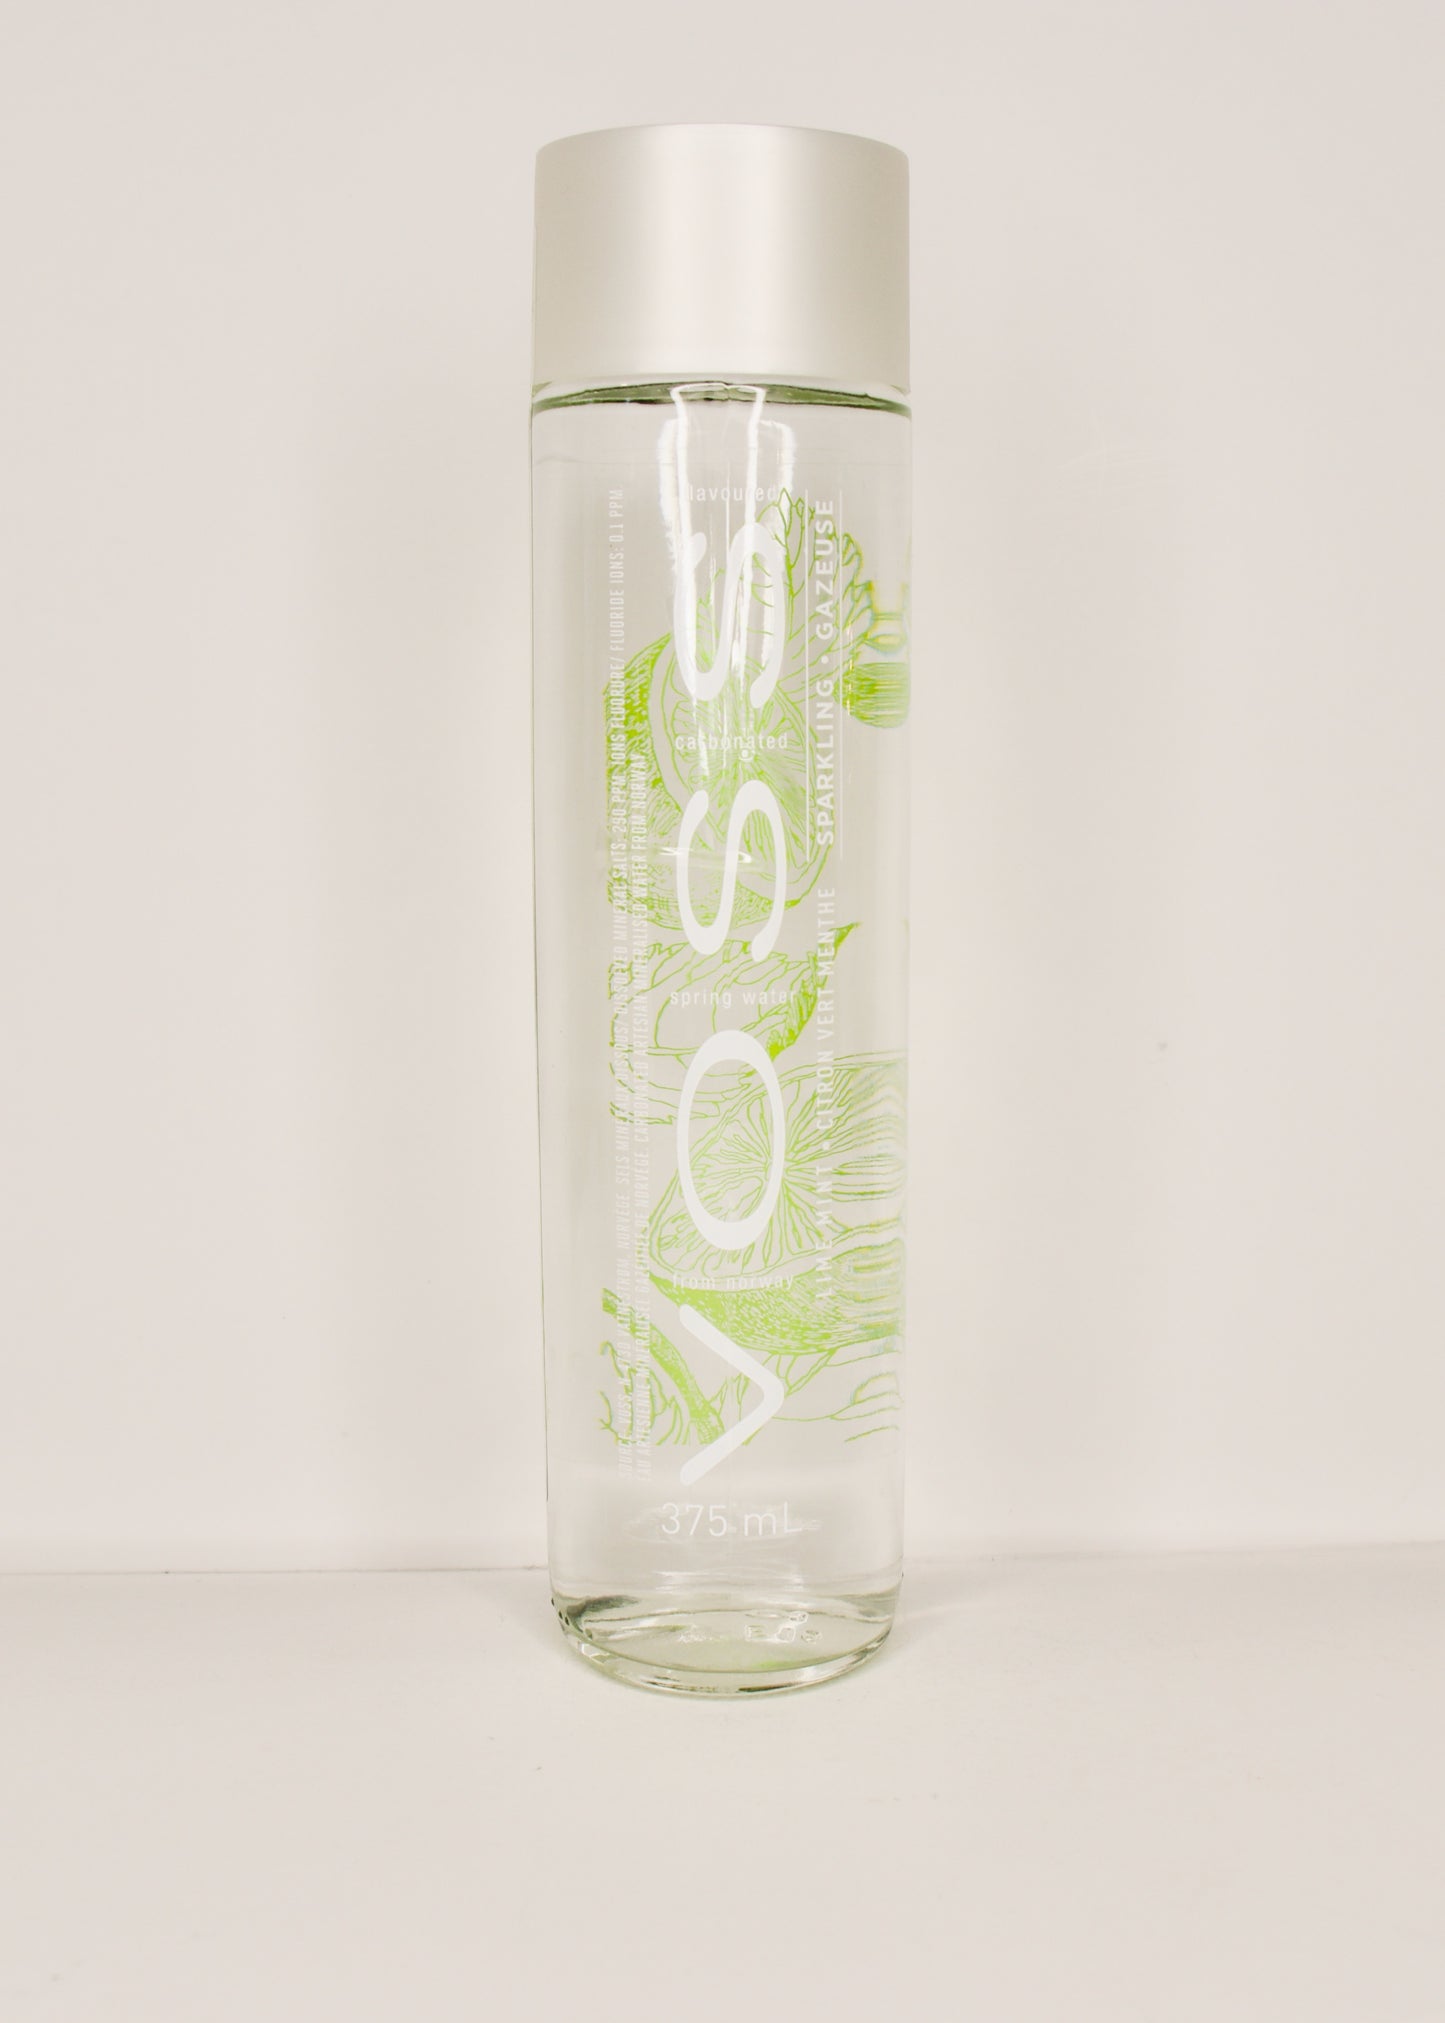 VOSS Lime Mint Water 375 ml